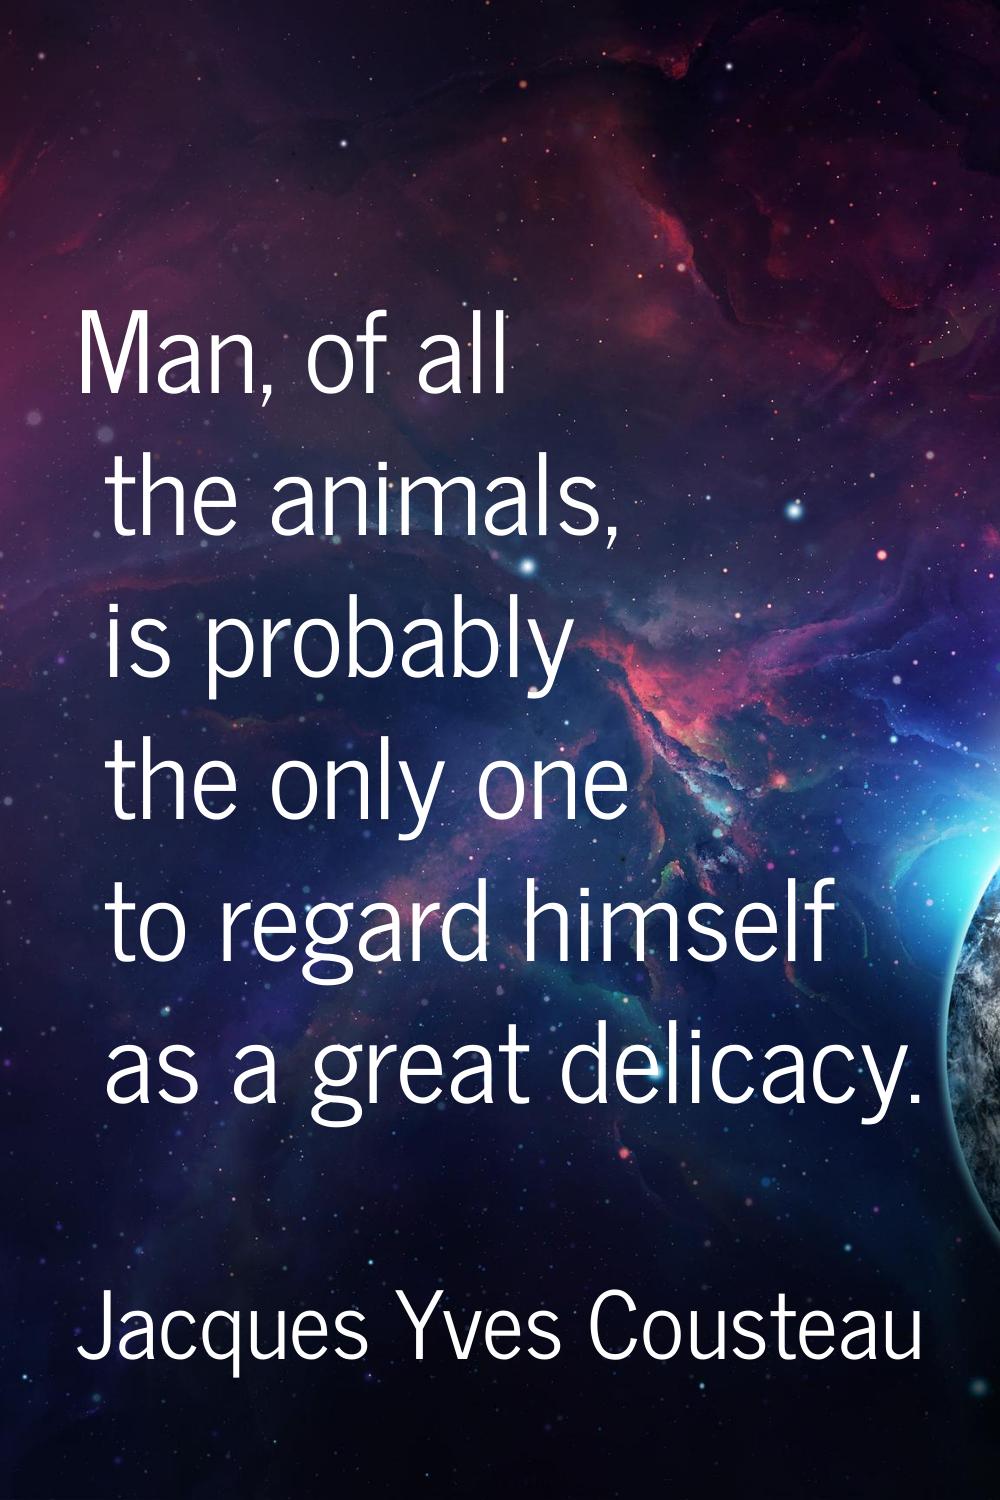 Man, of all the animals, is probably the only one to regard himself as a great delicacy.